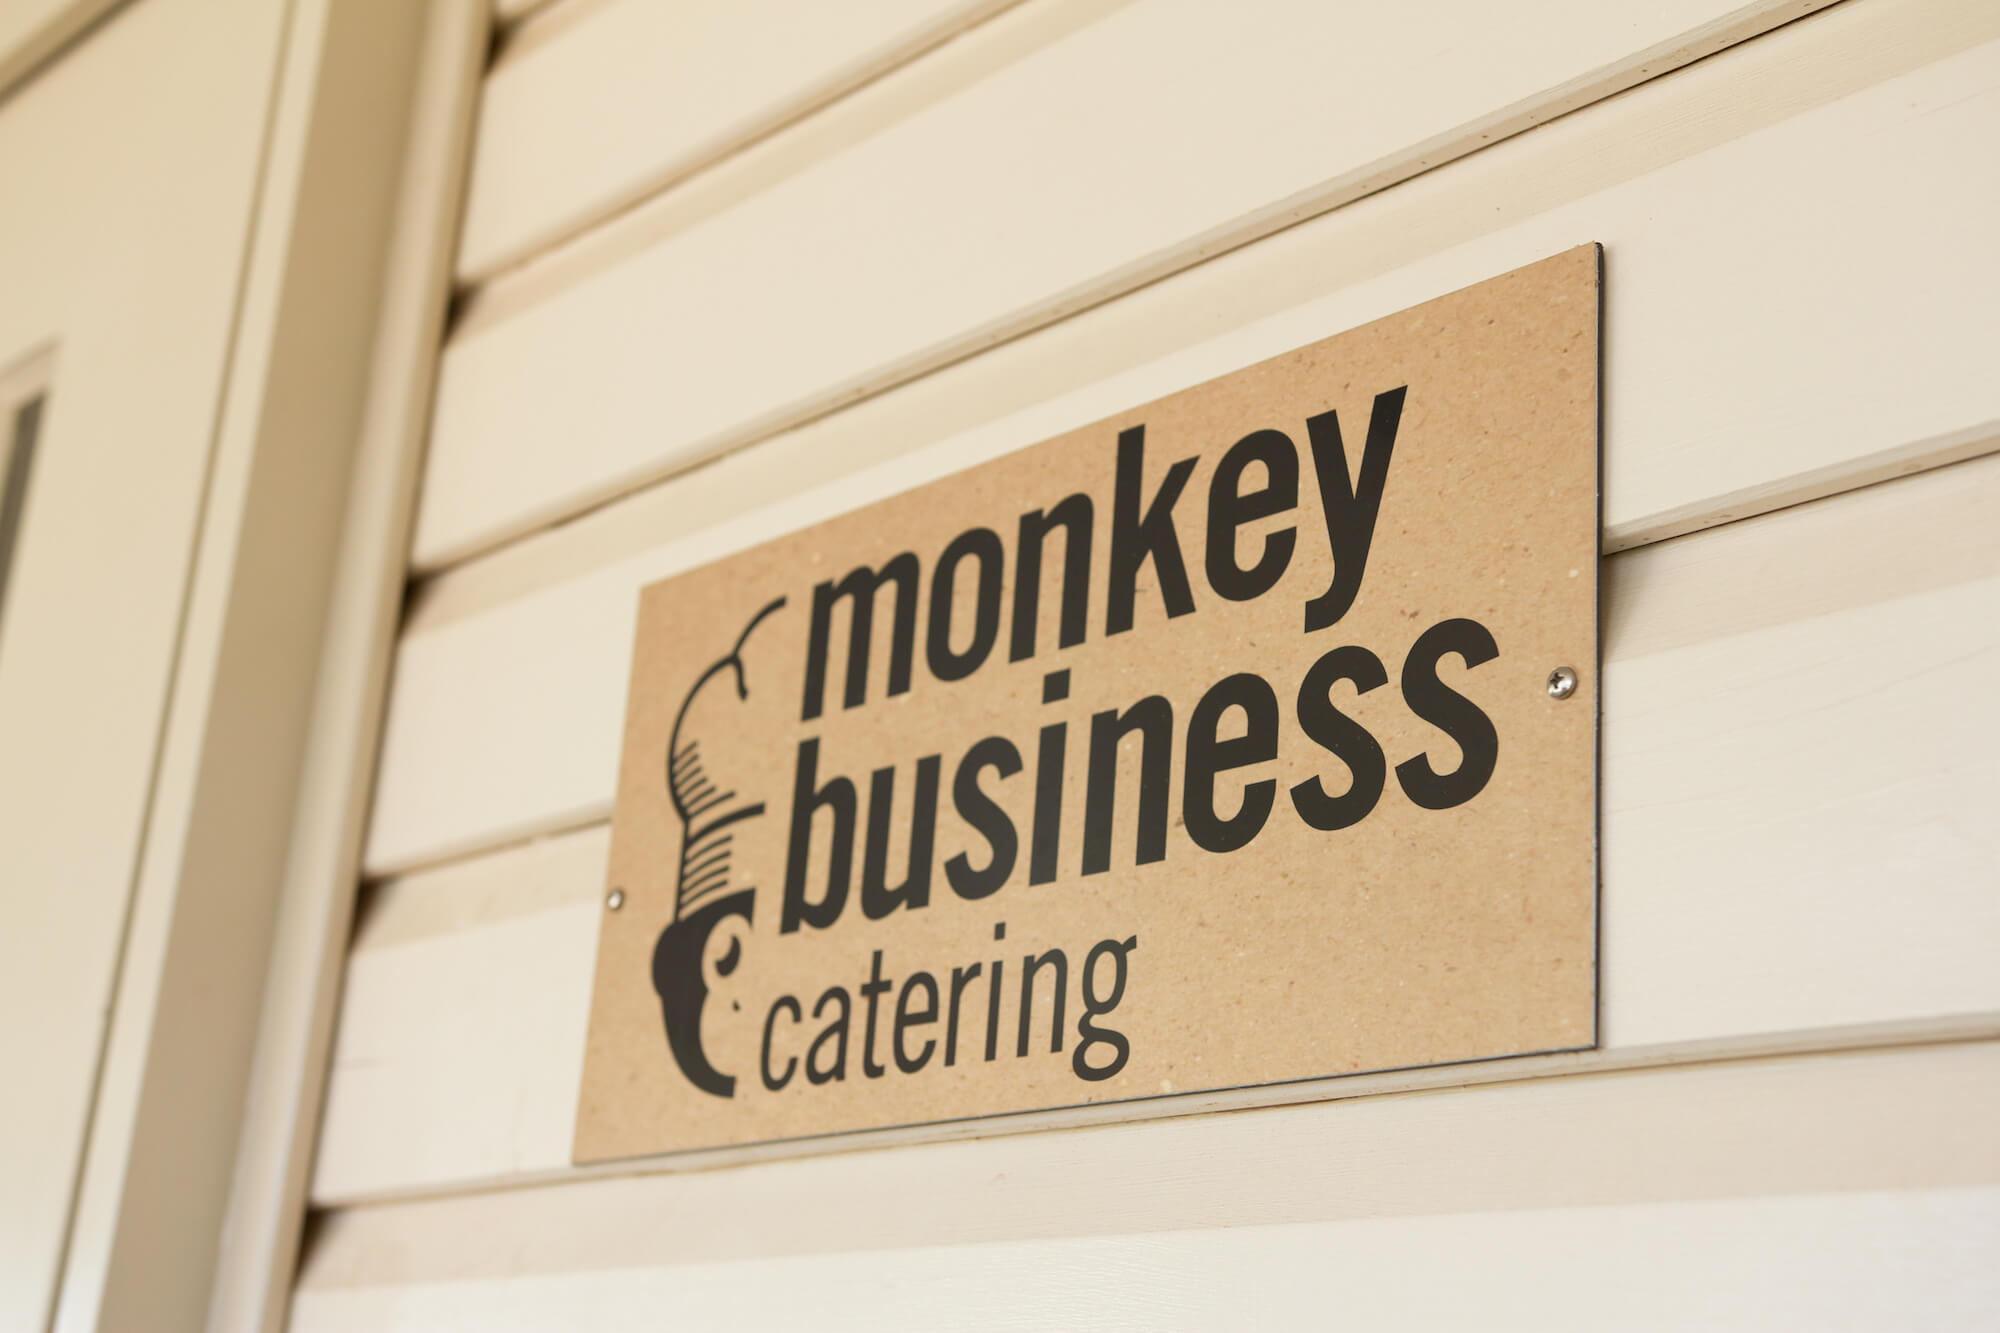 Monkey Business Catering – a Family’s Non-Linear Road to Success